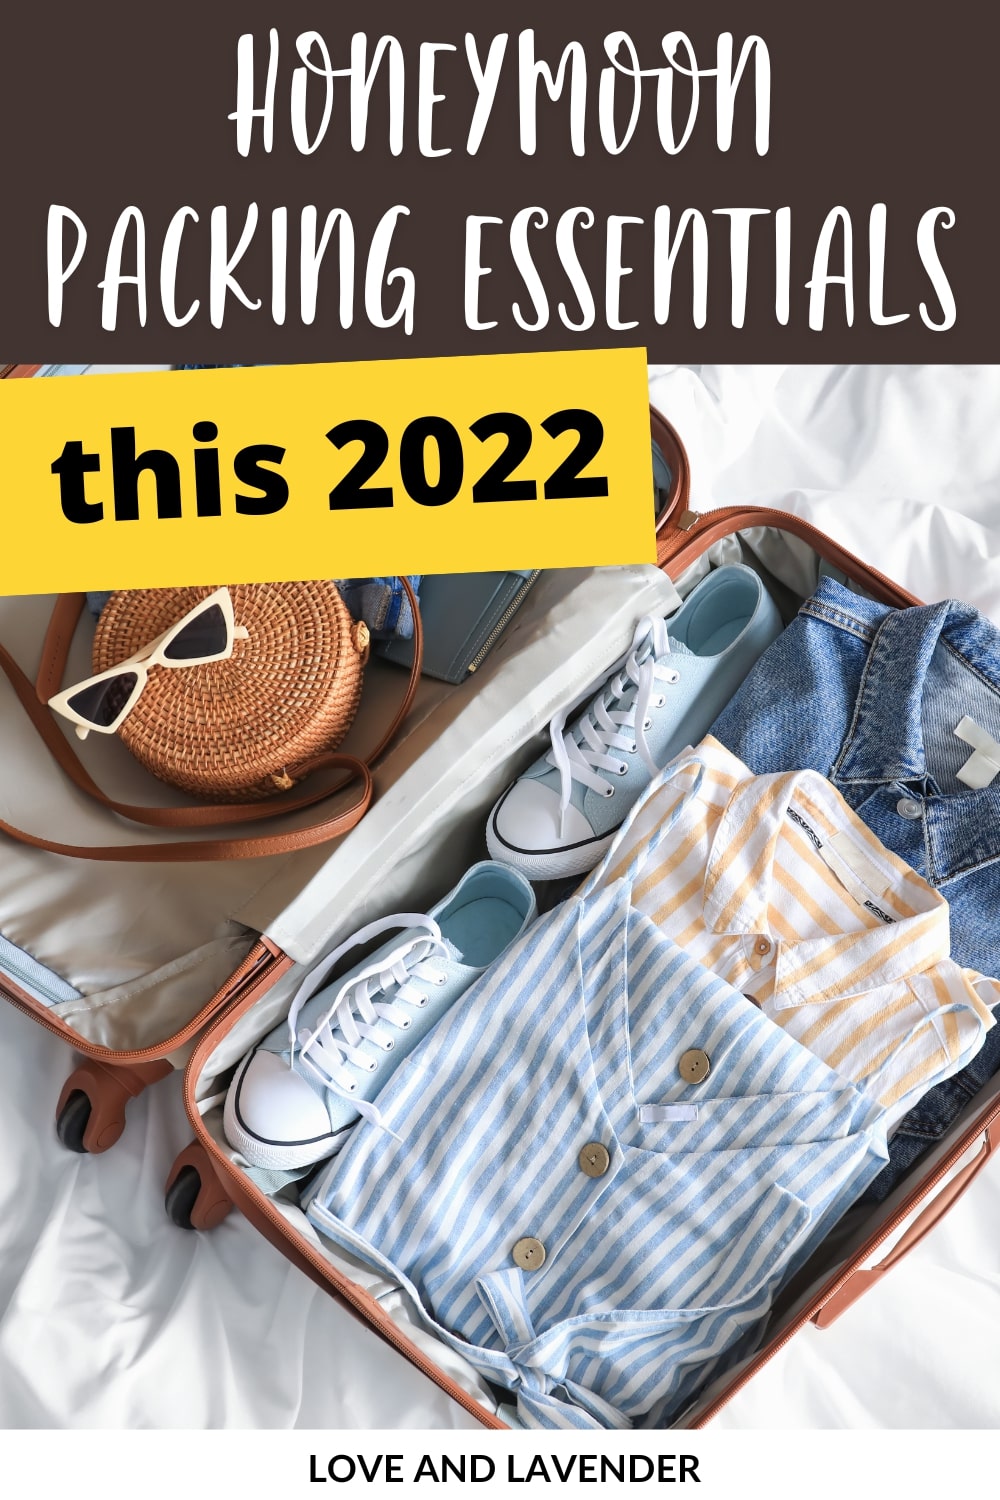 ﻿﻿Wondering what to pack for your honeymoon getaway? Check out our comprehensive packing guide for everything you need (and don't need) to make your trip perfect.